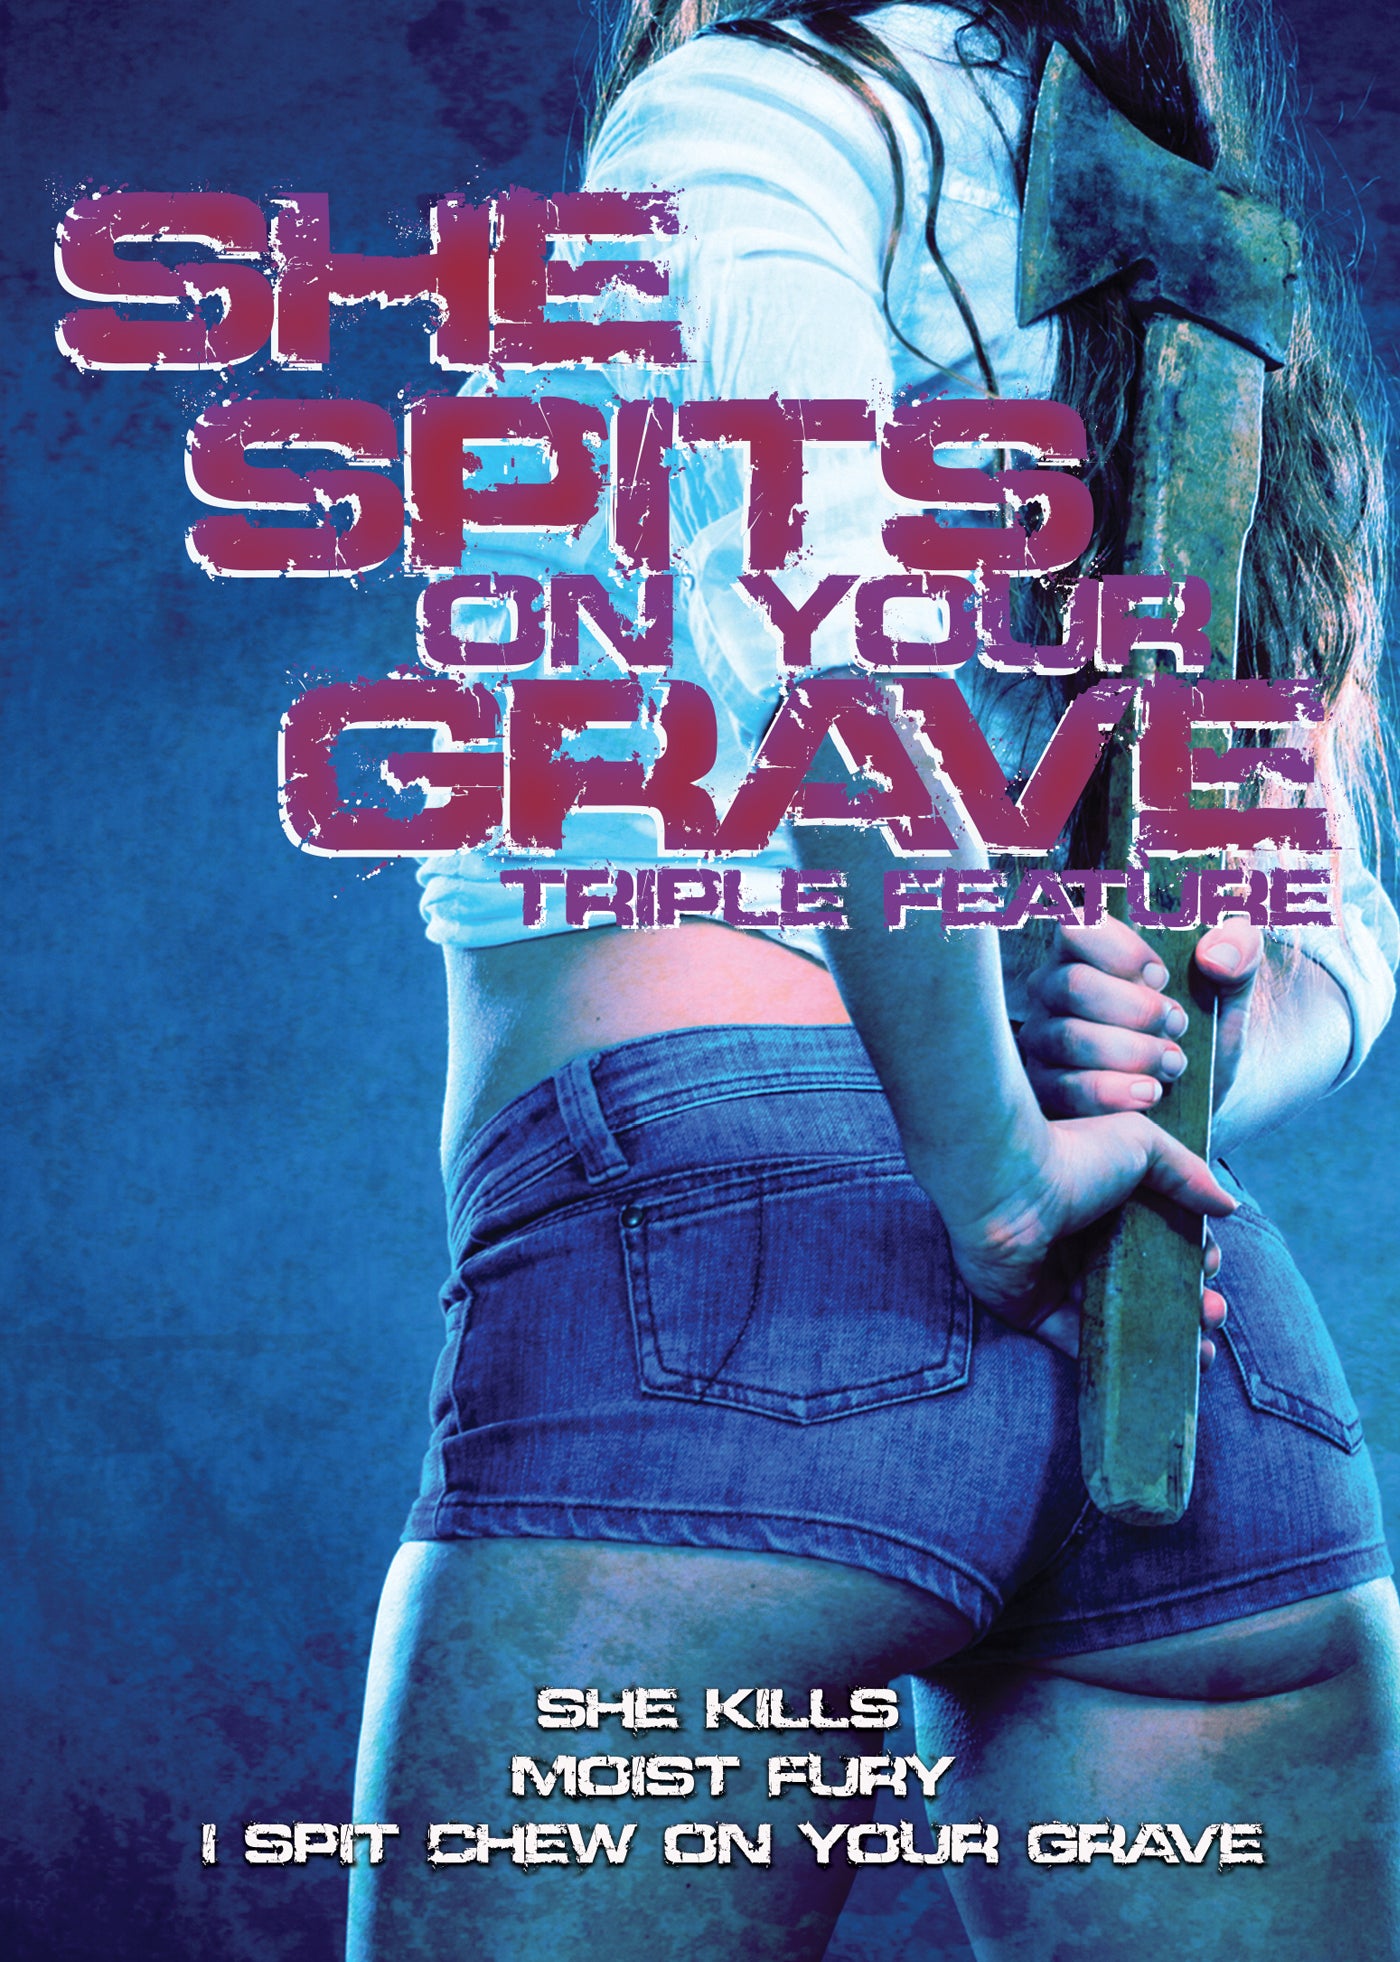 SHE SPITS ON YOUR GRAVE TRIPLE FEATURE DVD